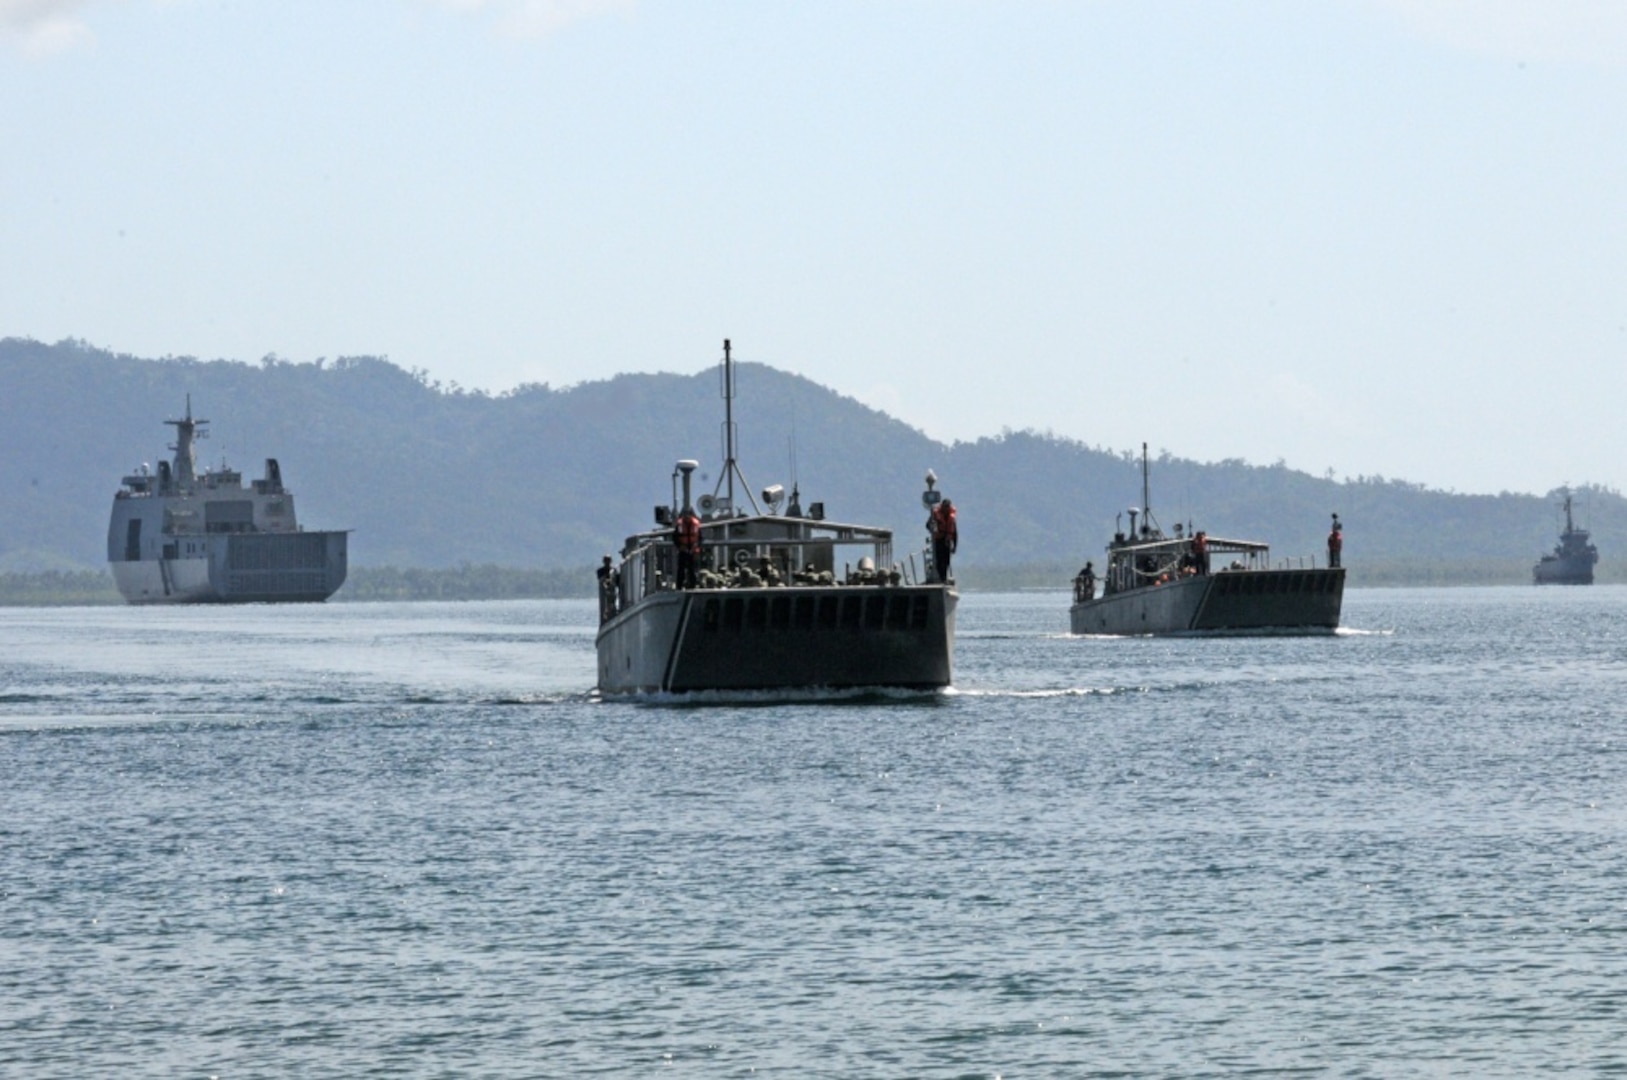 Armed Forces of the Philippines landing craft approach Motiong Beach, Casiguran, during civil military activities from the sea, May 15, 2017. The LCUs carried both U.S. and Philippine forces who were training for humanitarian assistance and disaster response operations. Balikatan is an annual U.S.-Philippine bilateral military exercise focused on a variety of missions, including humanitarian assistance and disaster relief, counterterrorism and other combined military operations.